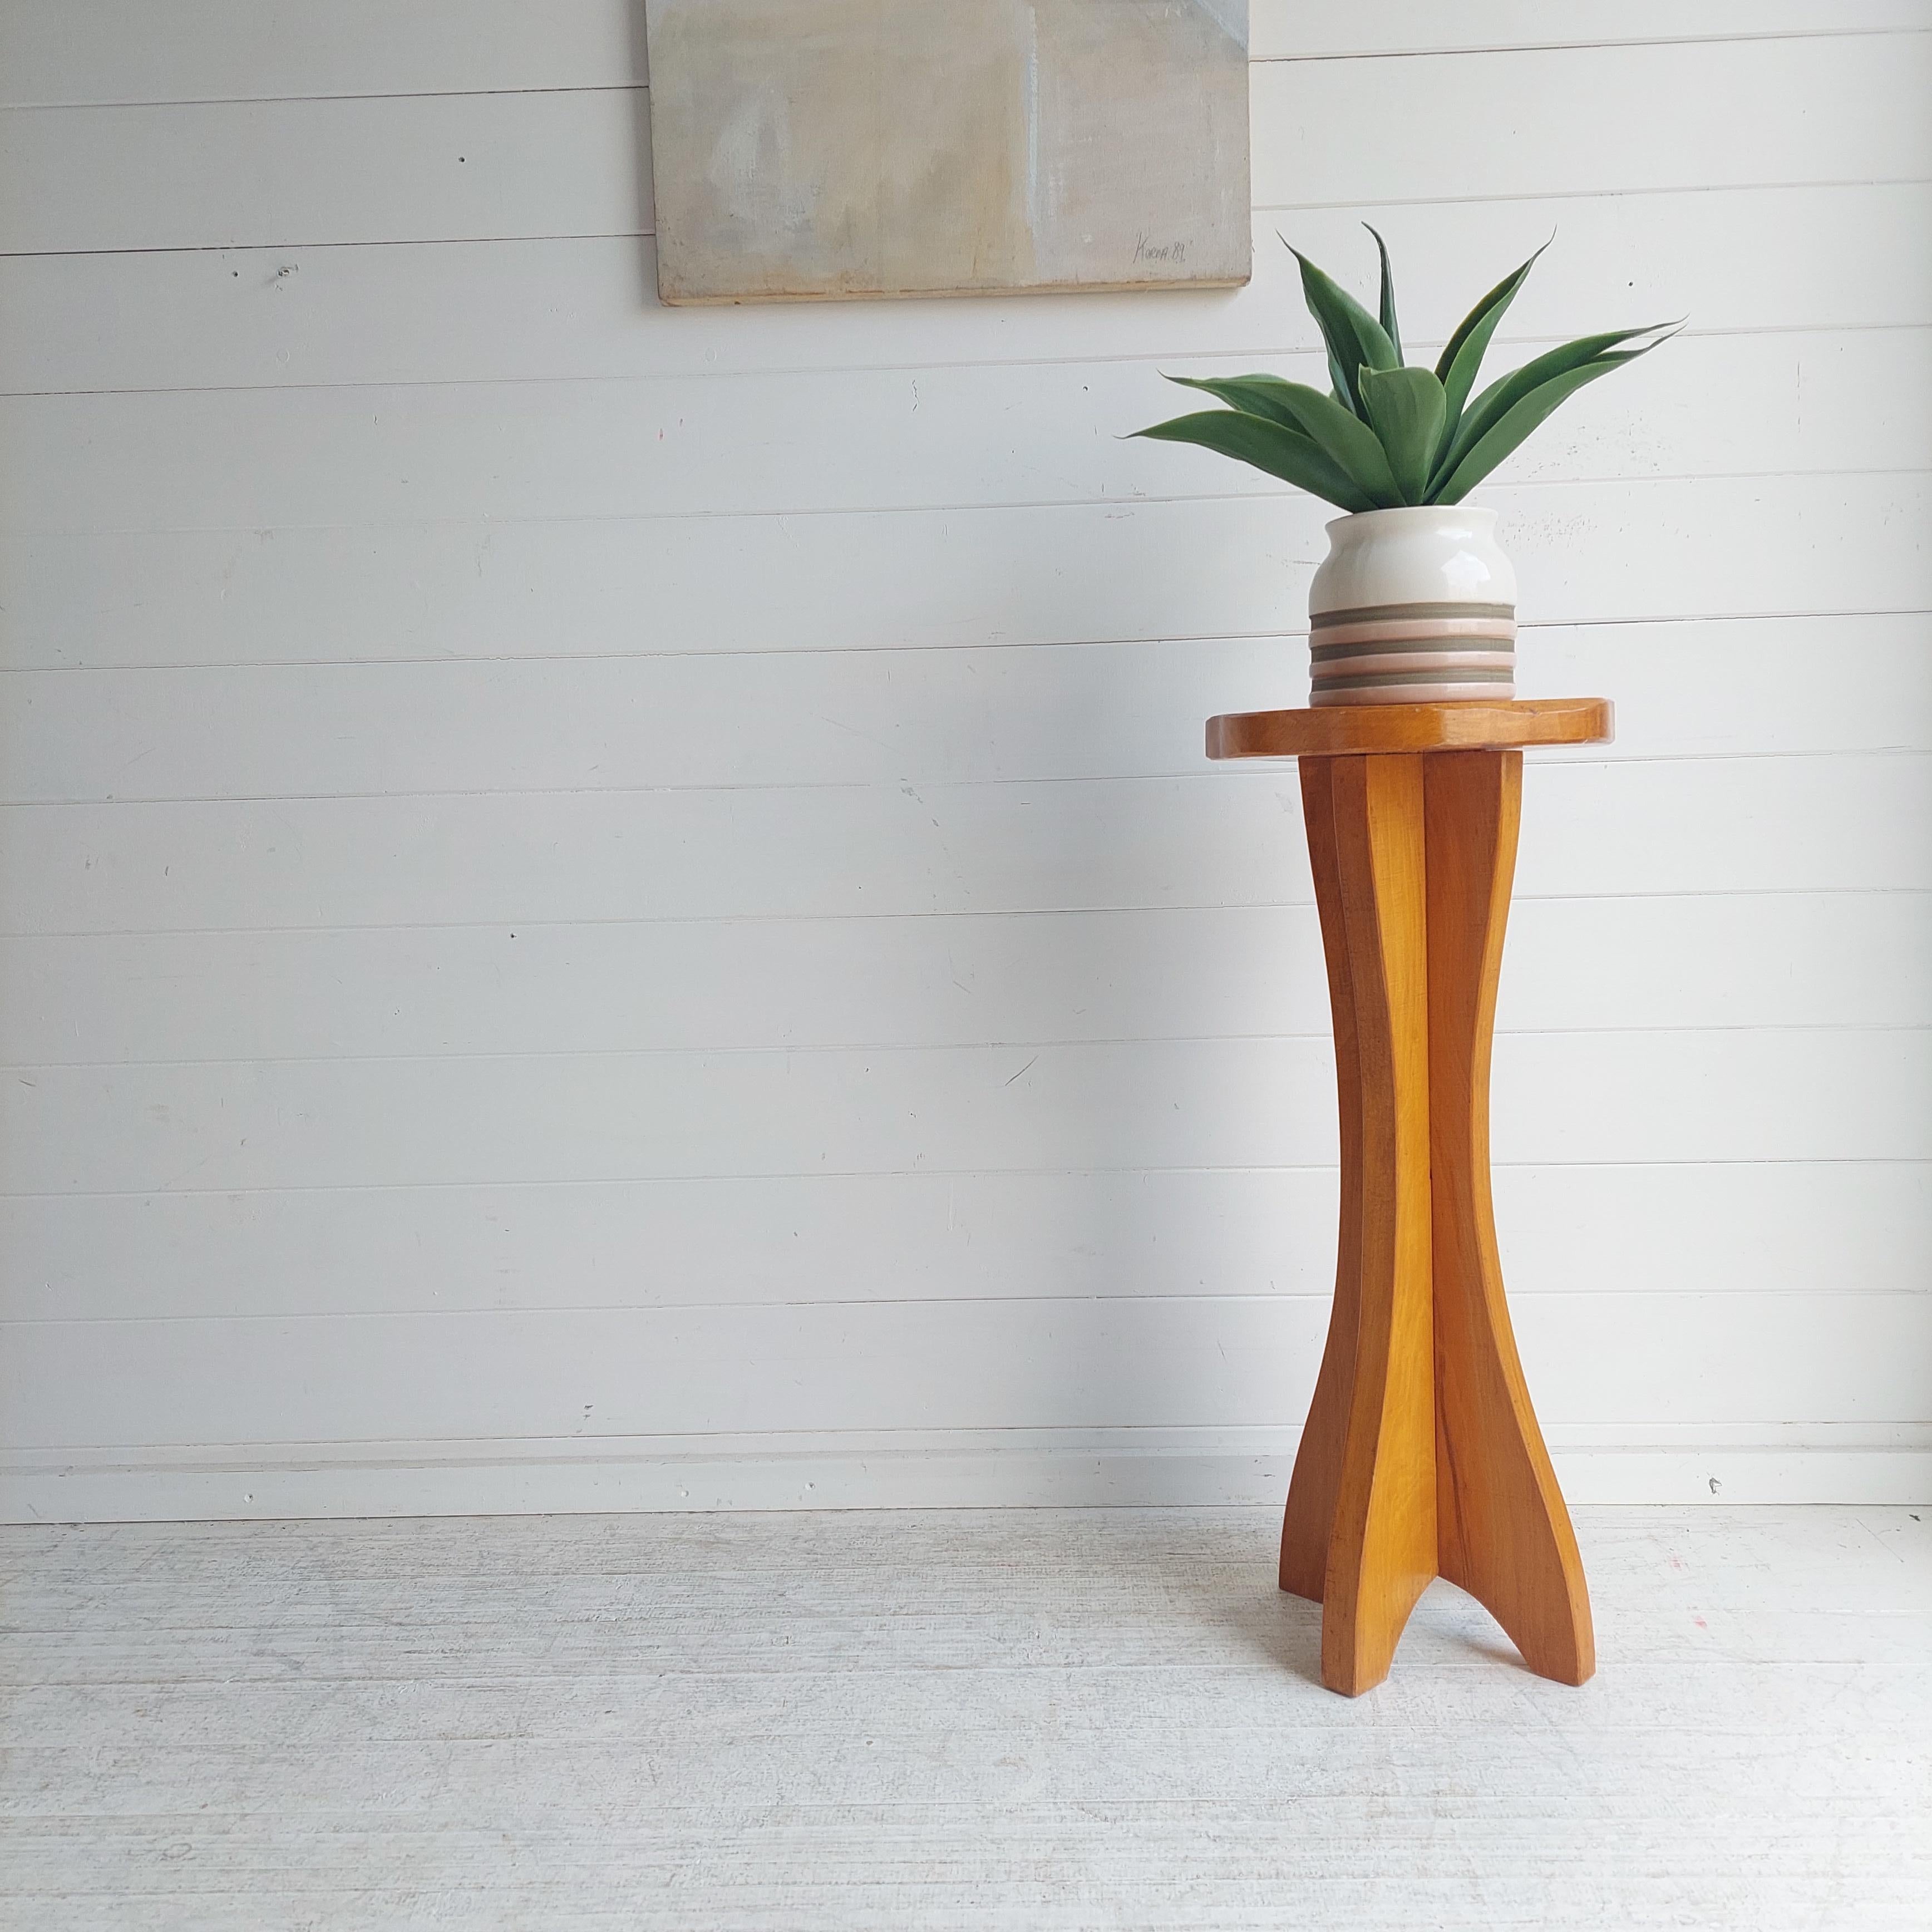 A beautifully  solid carved  torchere / plant table. 
This was made in England in the mid century  period, it dates from around 1950s.

A tall mid century side table, which were likely hand-made.
One of a kind pedestal, unlikely to find any other